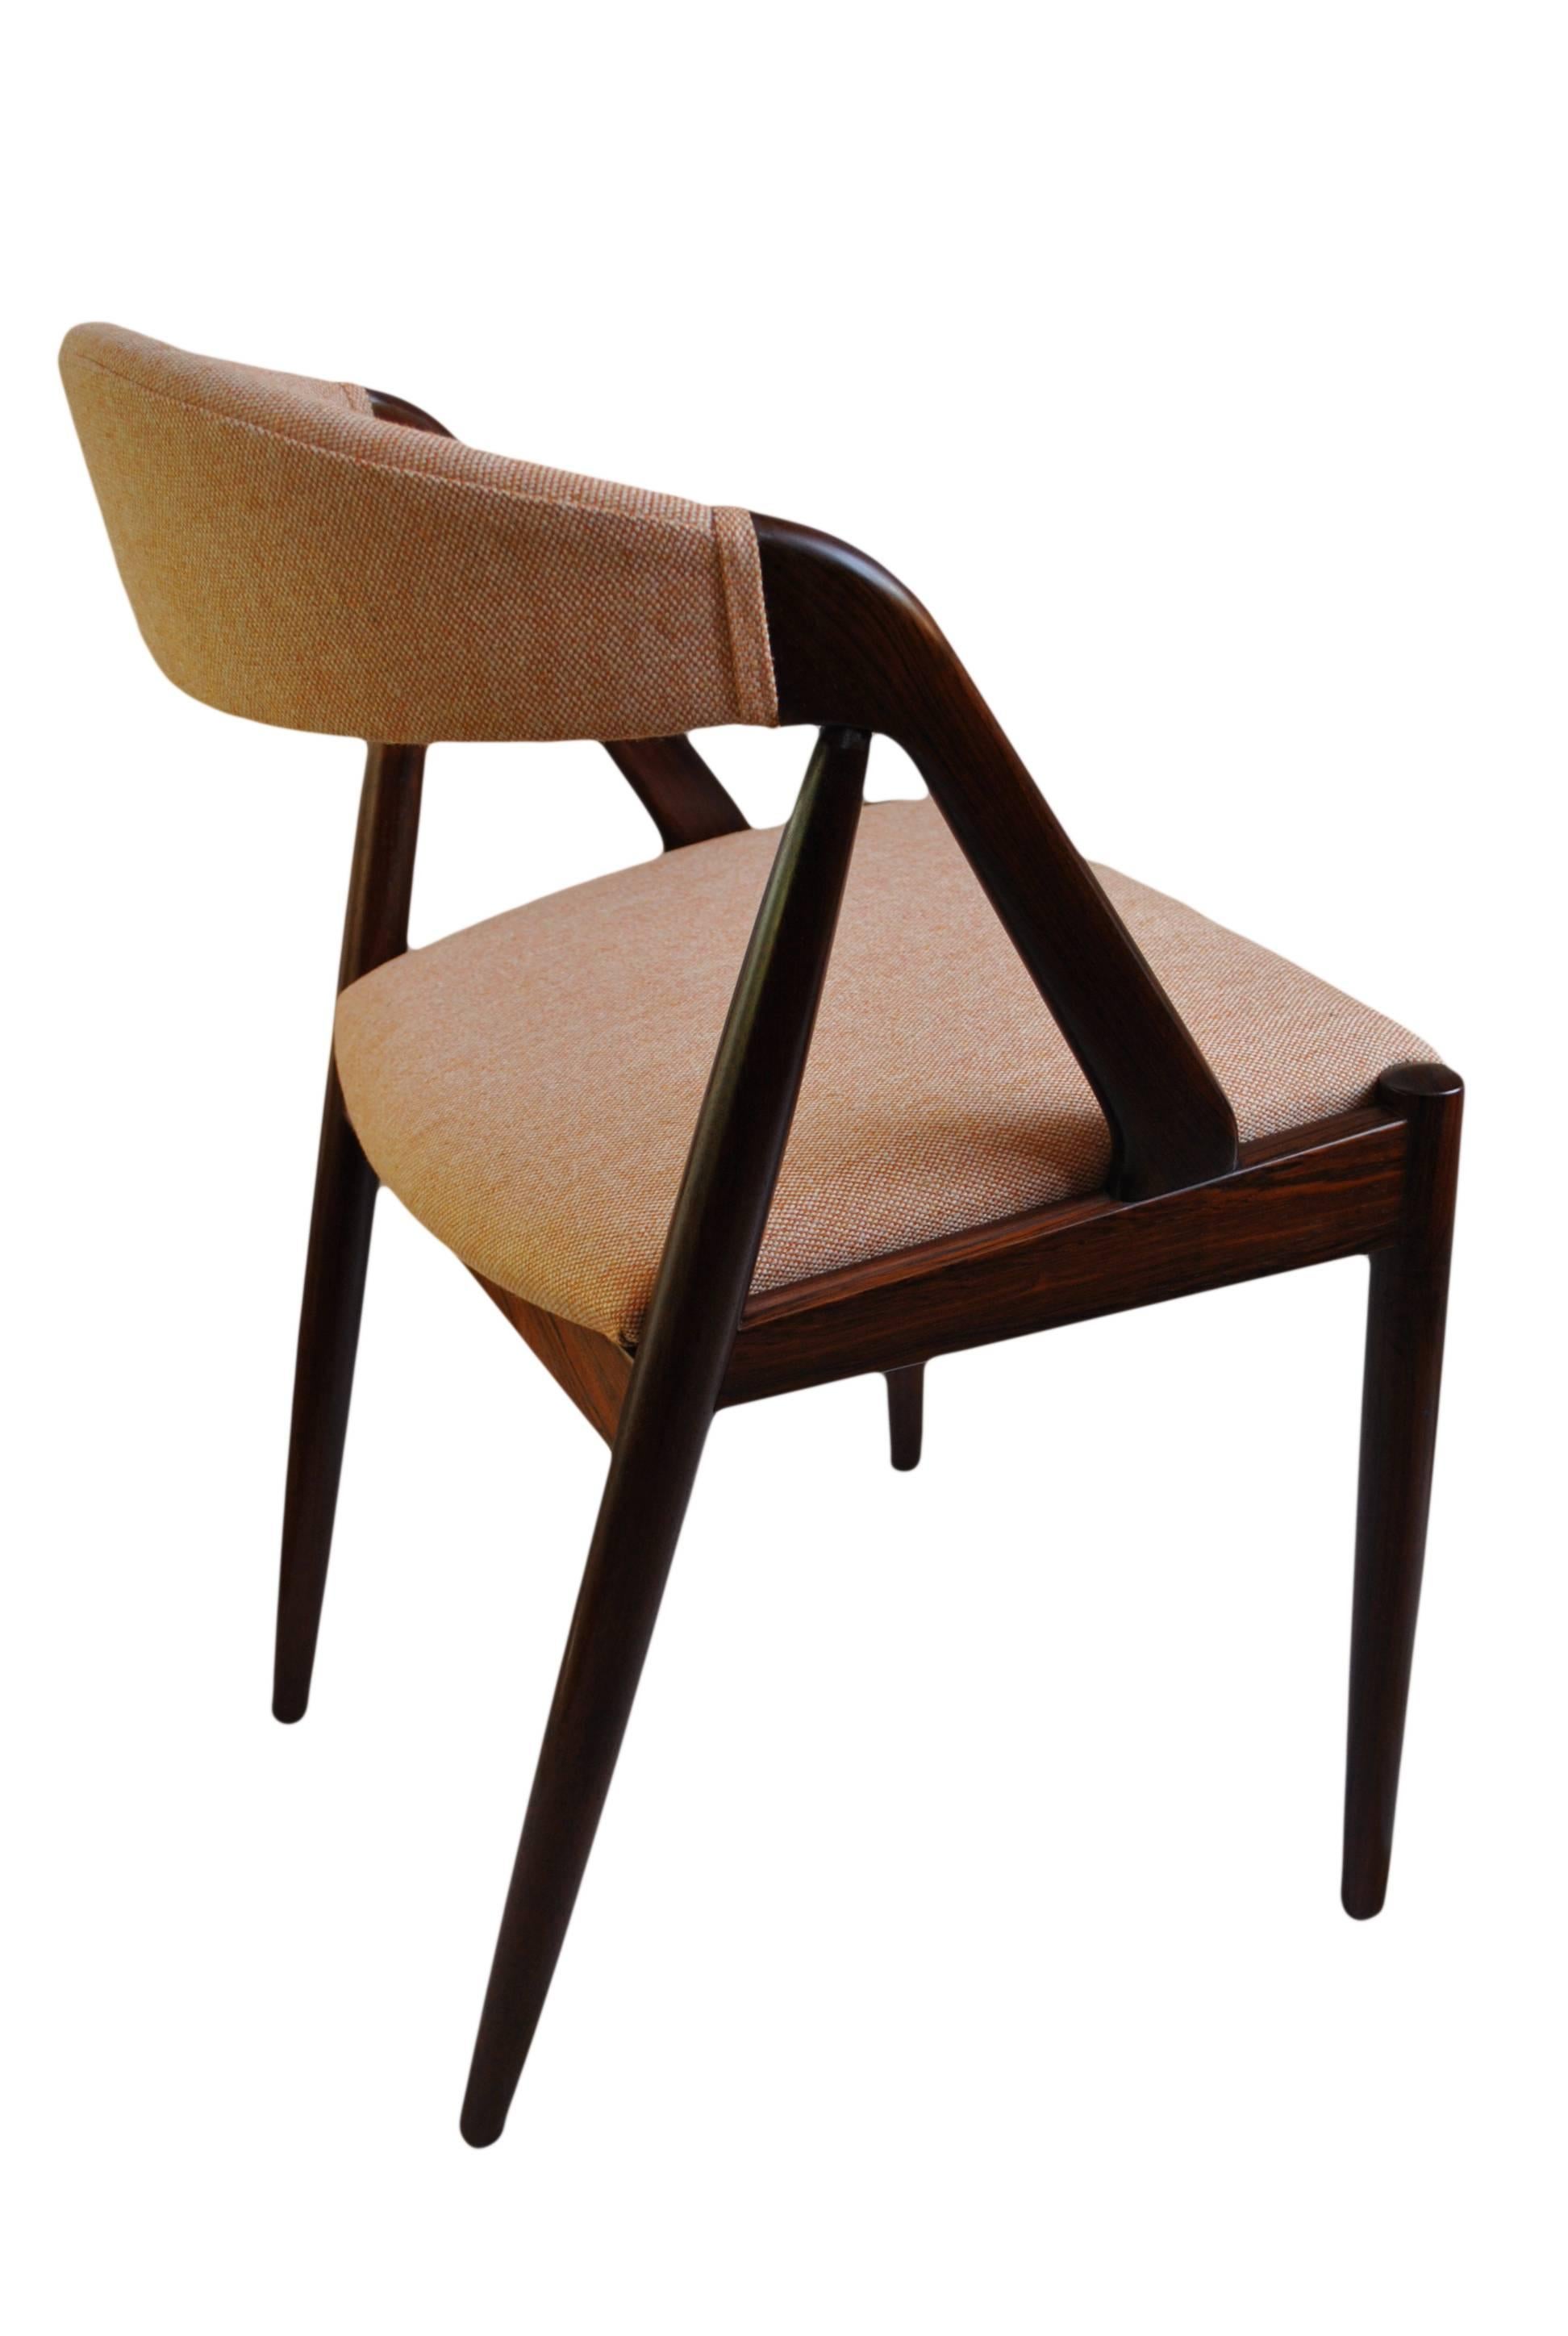 Kai Kristiansen Dining Chairs, Refurbished and reupholstered. 2